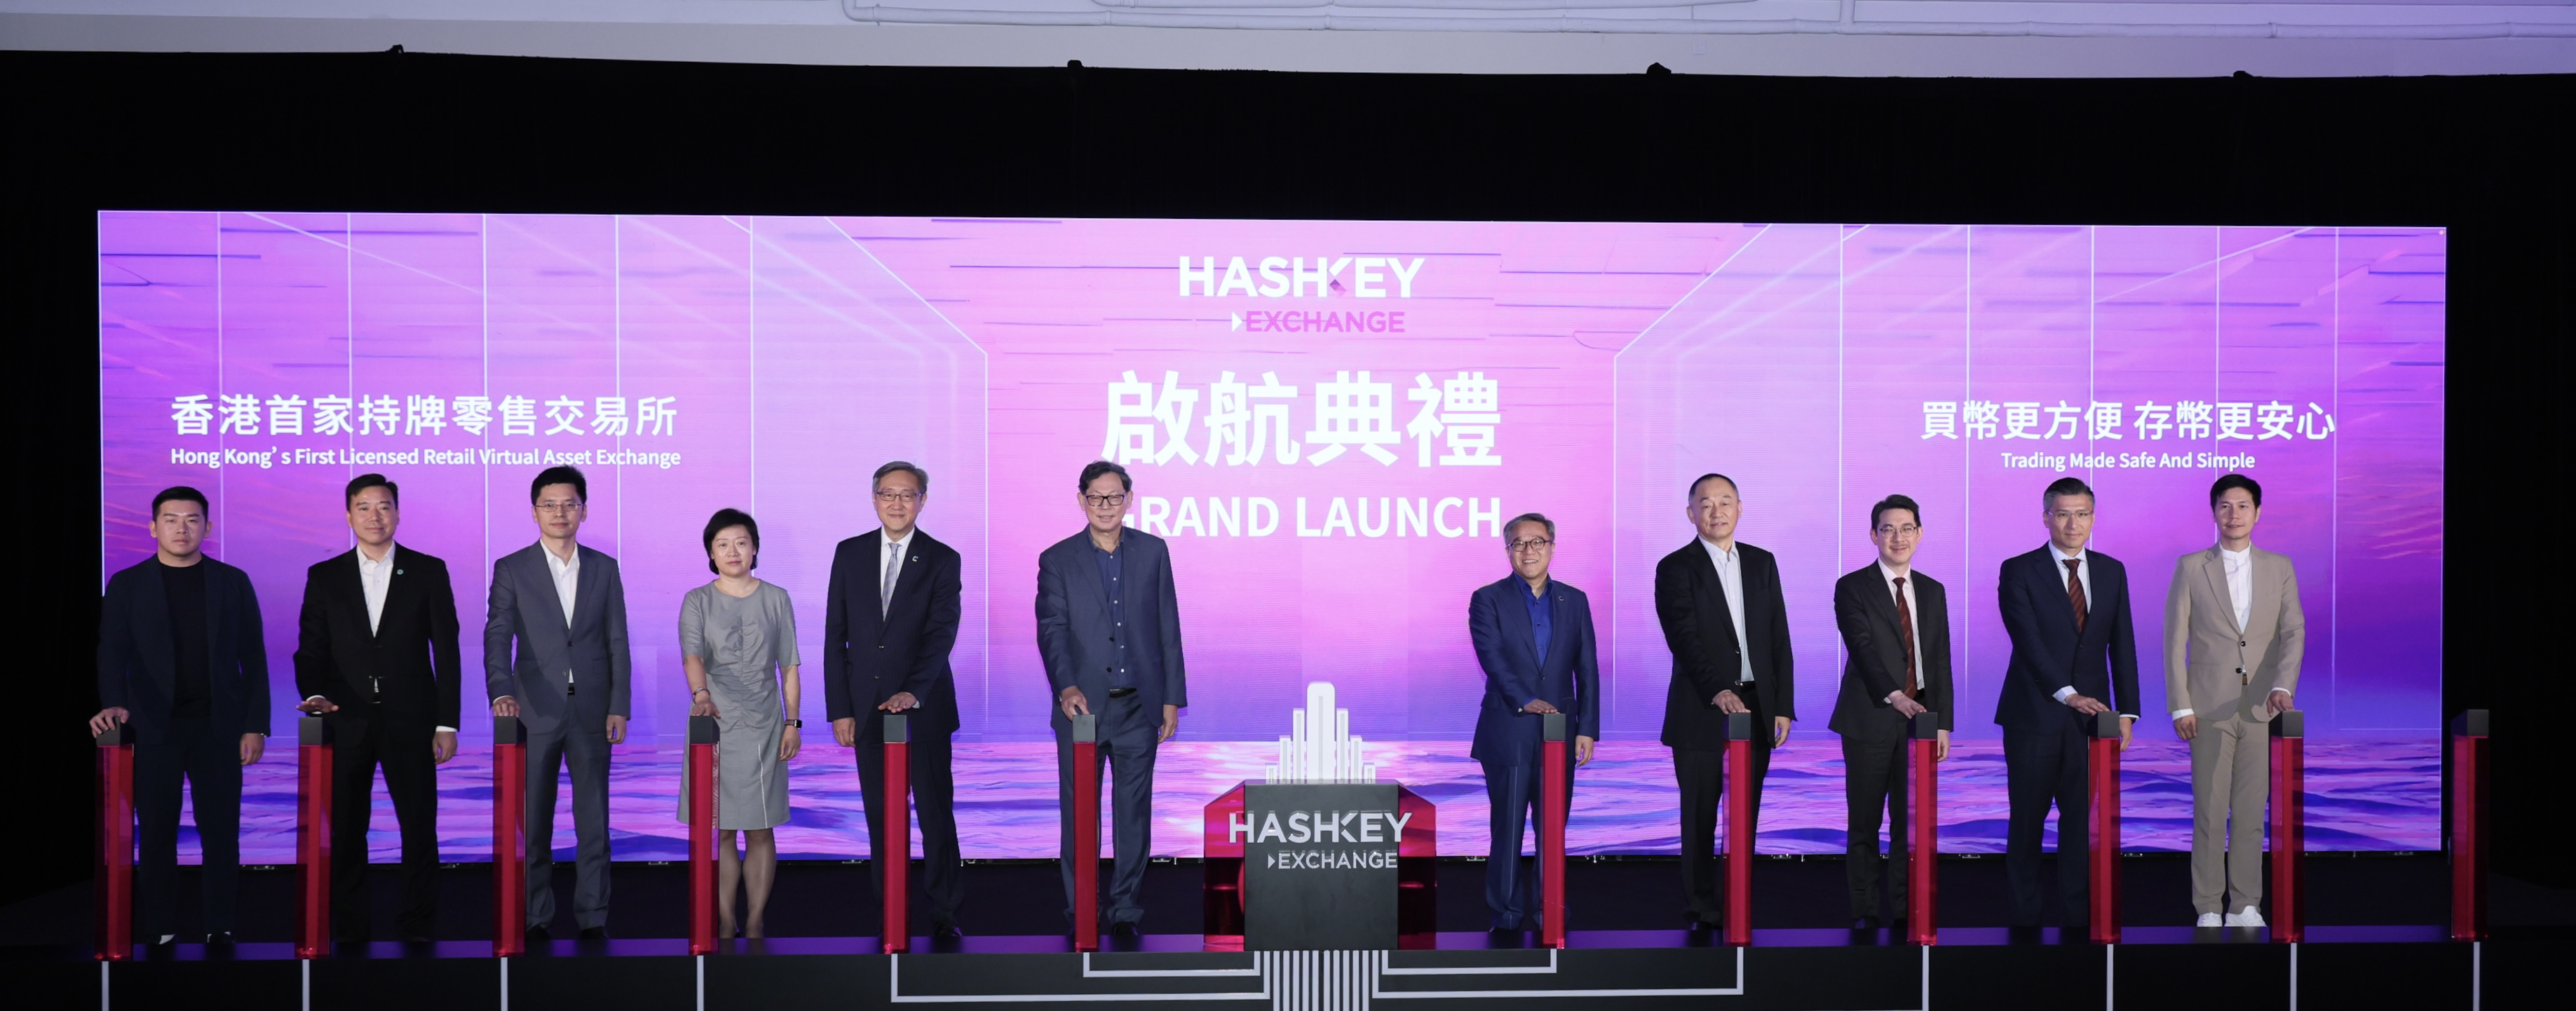 Representatives from Hong Kong's treasury, financial institutions, accounting sector, and the Web3 landscape commemorated the initiation of retail trading during an event hosted at the Central Maritime Museum. This event was organized in collaboration with HashKey Exchange.